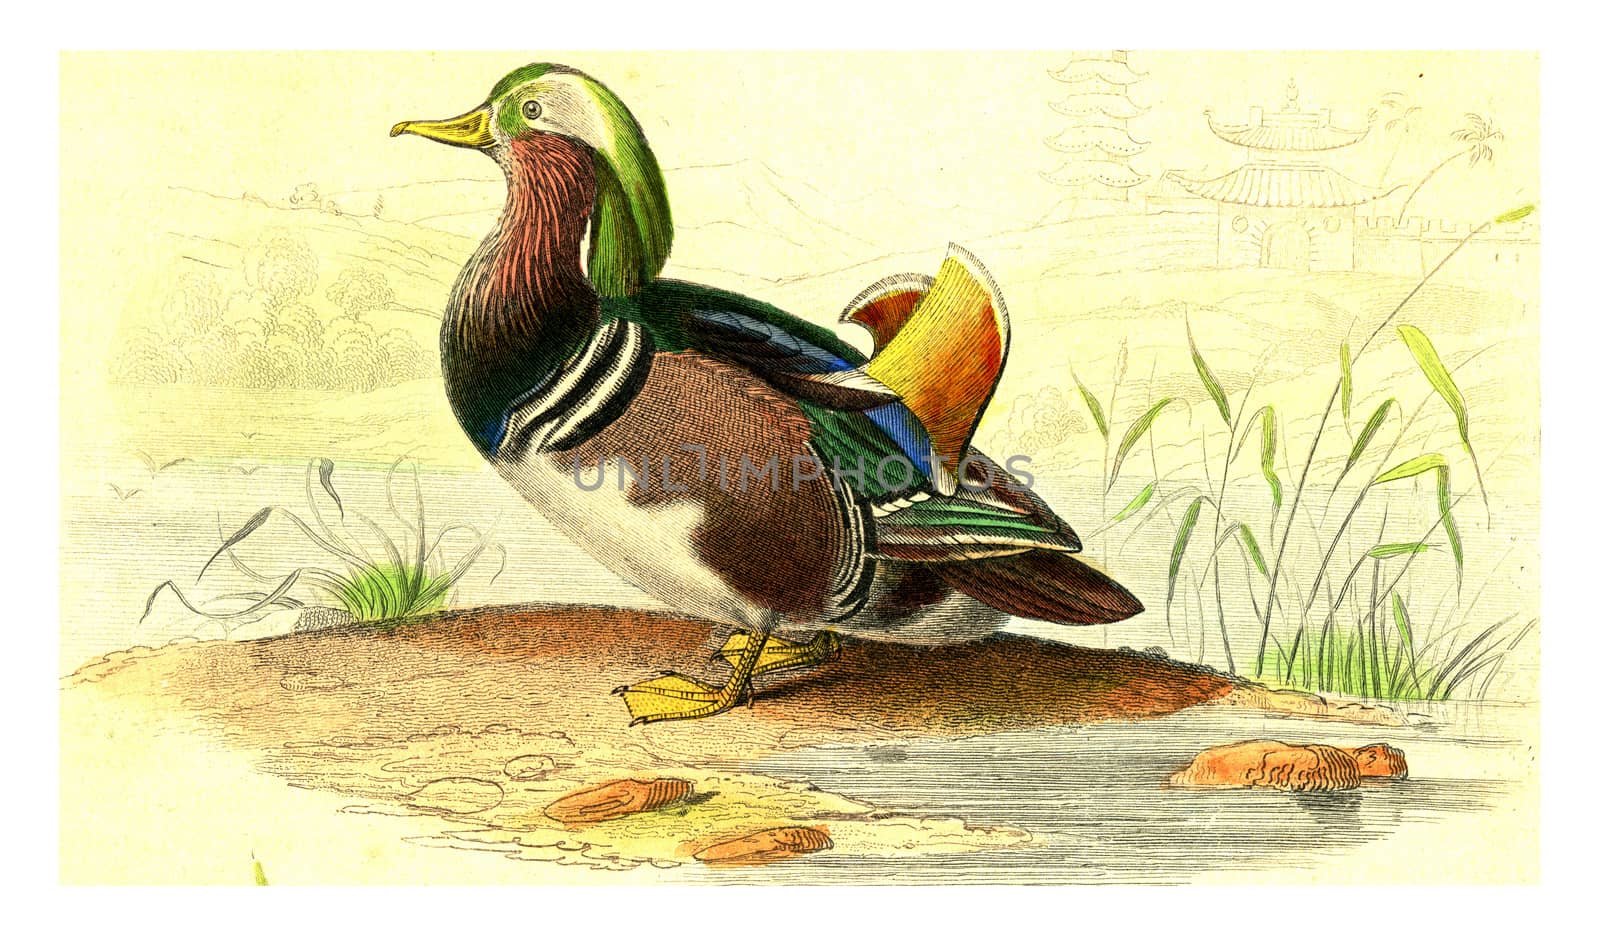 Duck range of China, vintage engraving. by Morphart